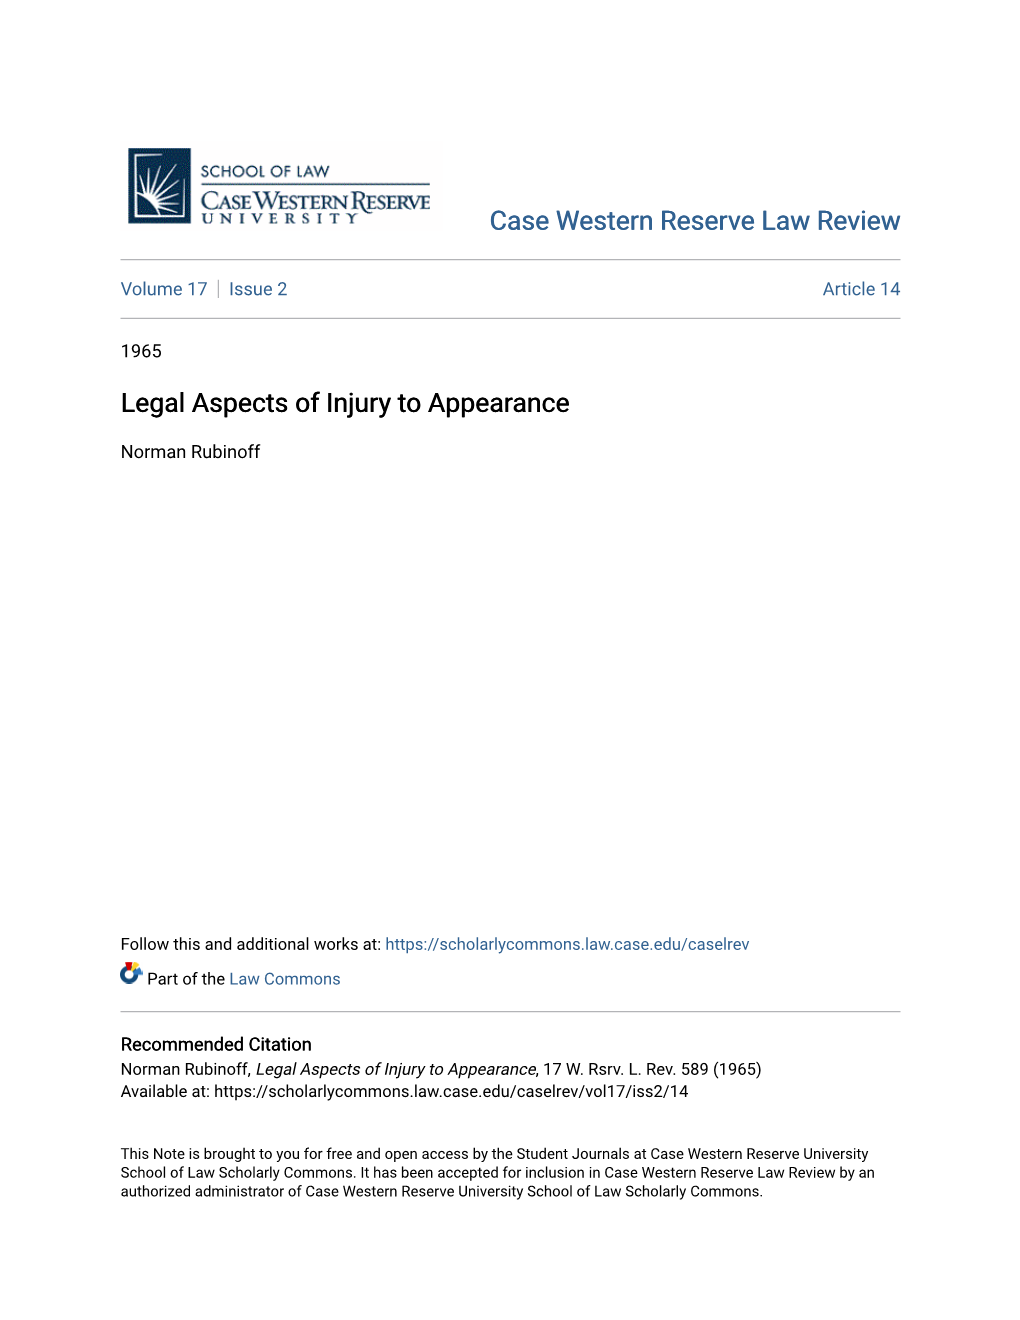 Legal Aspects of Injury to Appearance